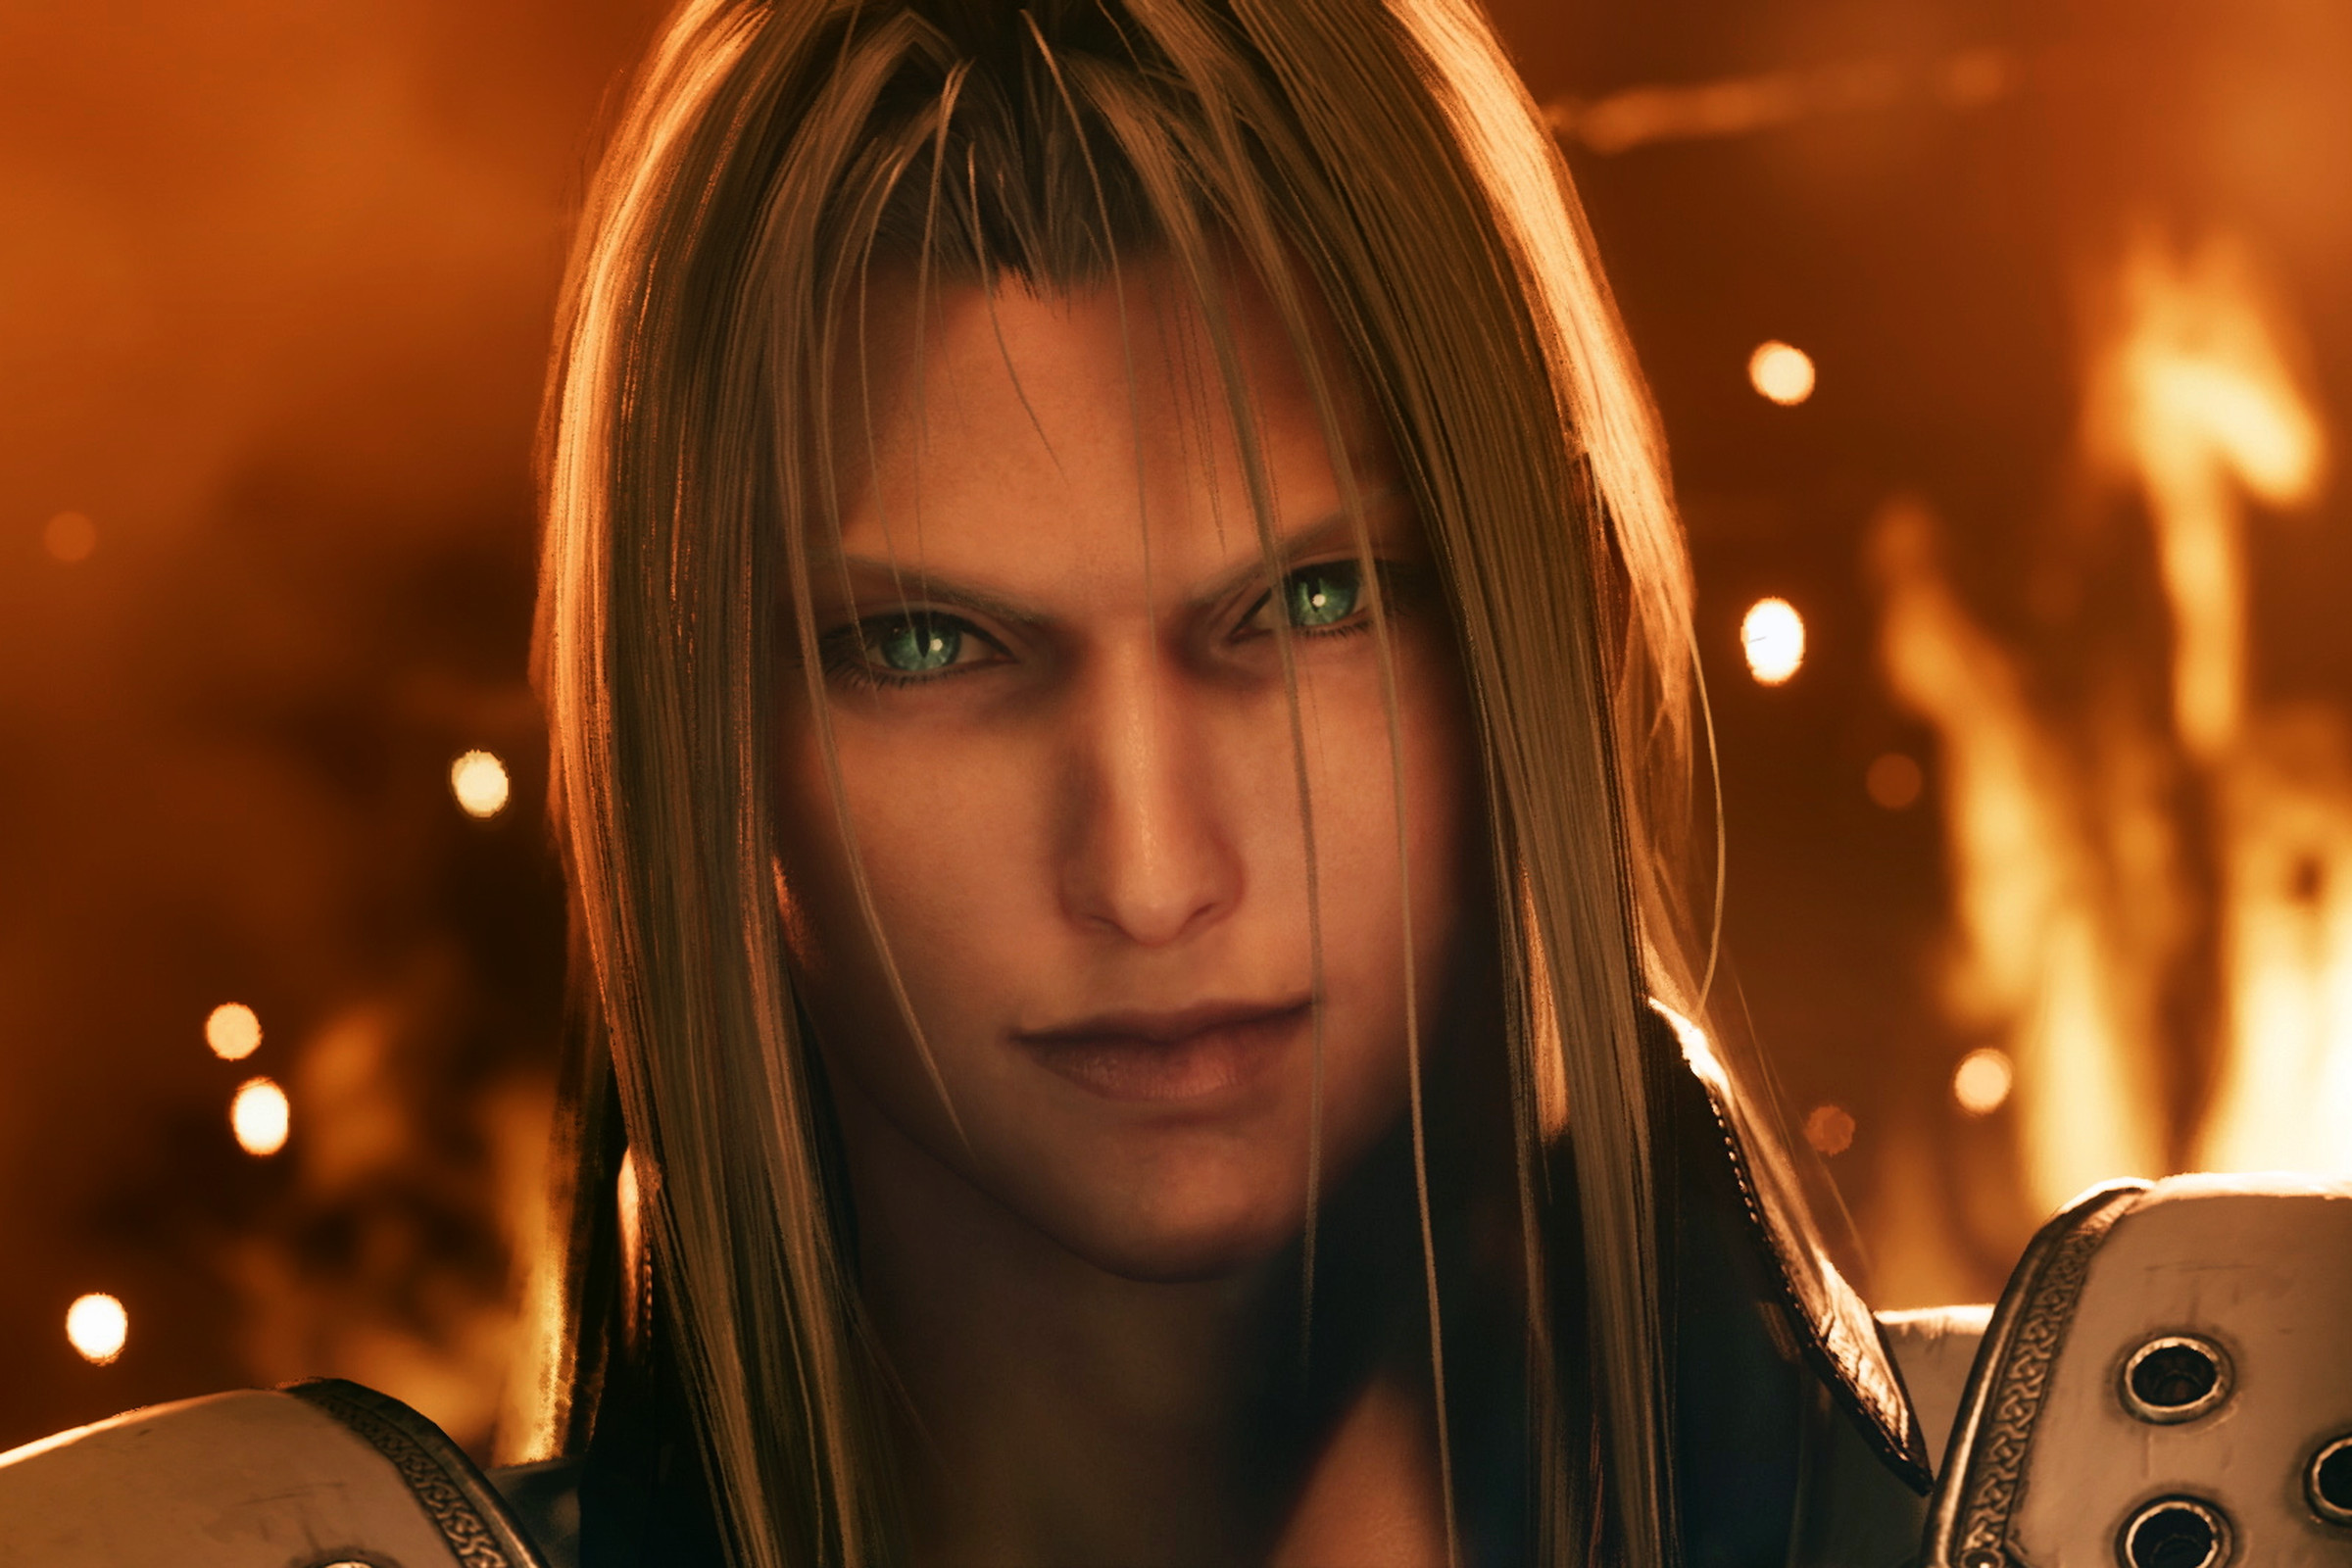 Image of Sephiroth from Final Fantasy VII Remake staring menacingly into the camera with bright mako-green eyes as the background burns